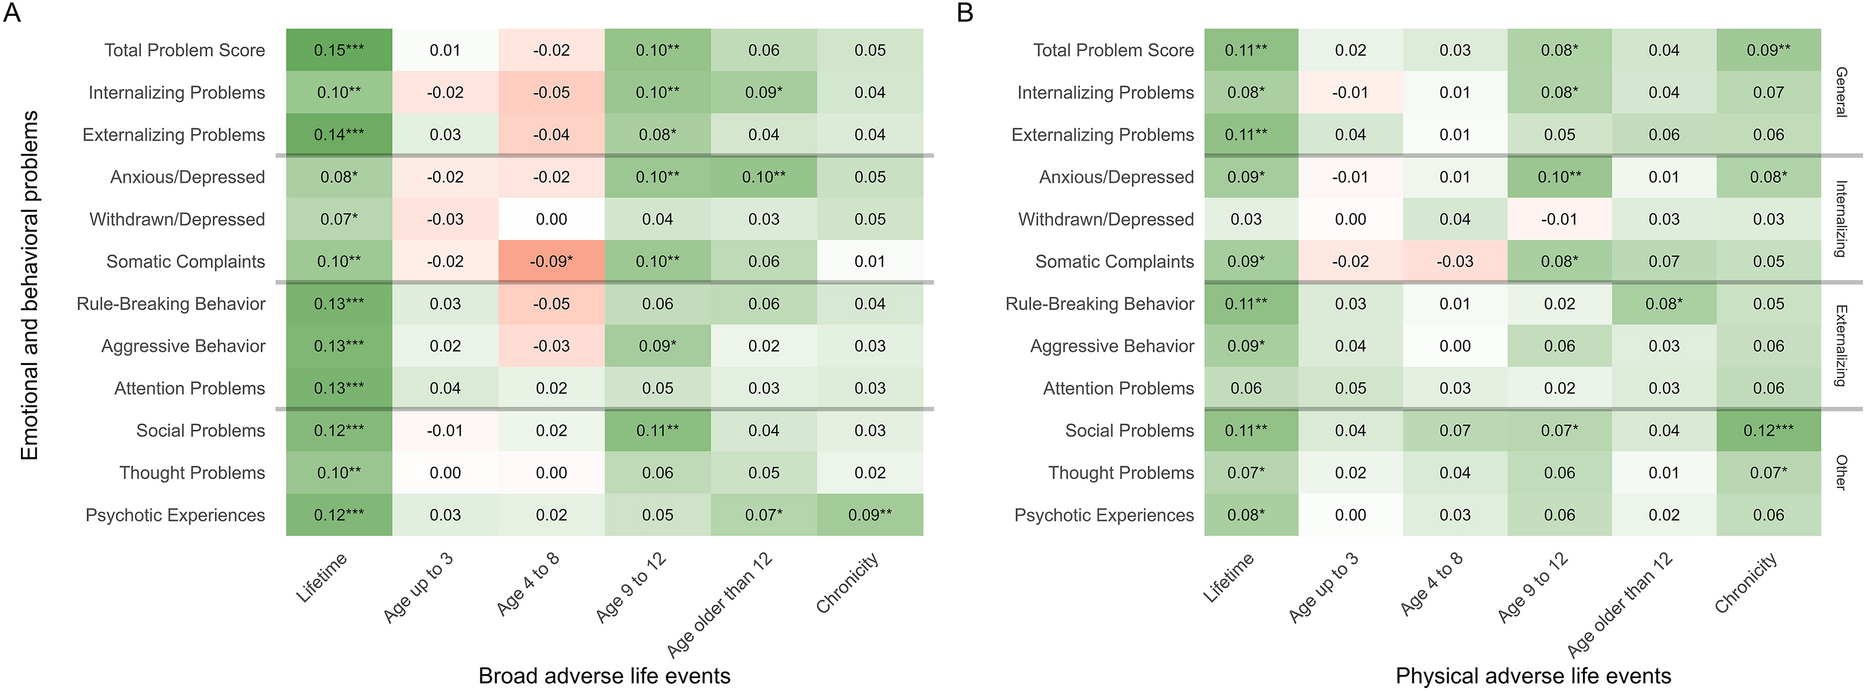 Childhood adversity and psychopathology: the dimensions of timing, type and chronicity in a population-based sample of high-risk adolescents